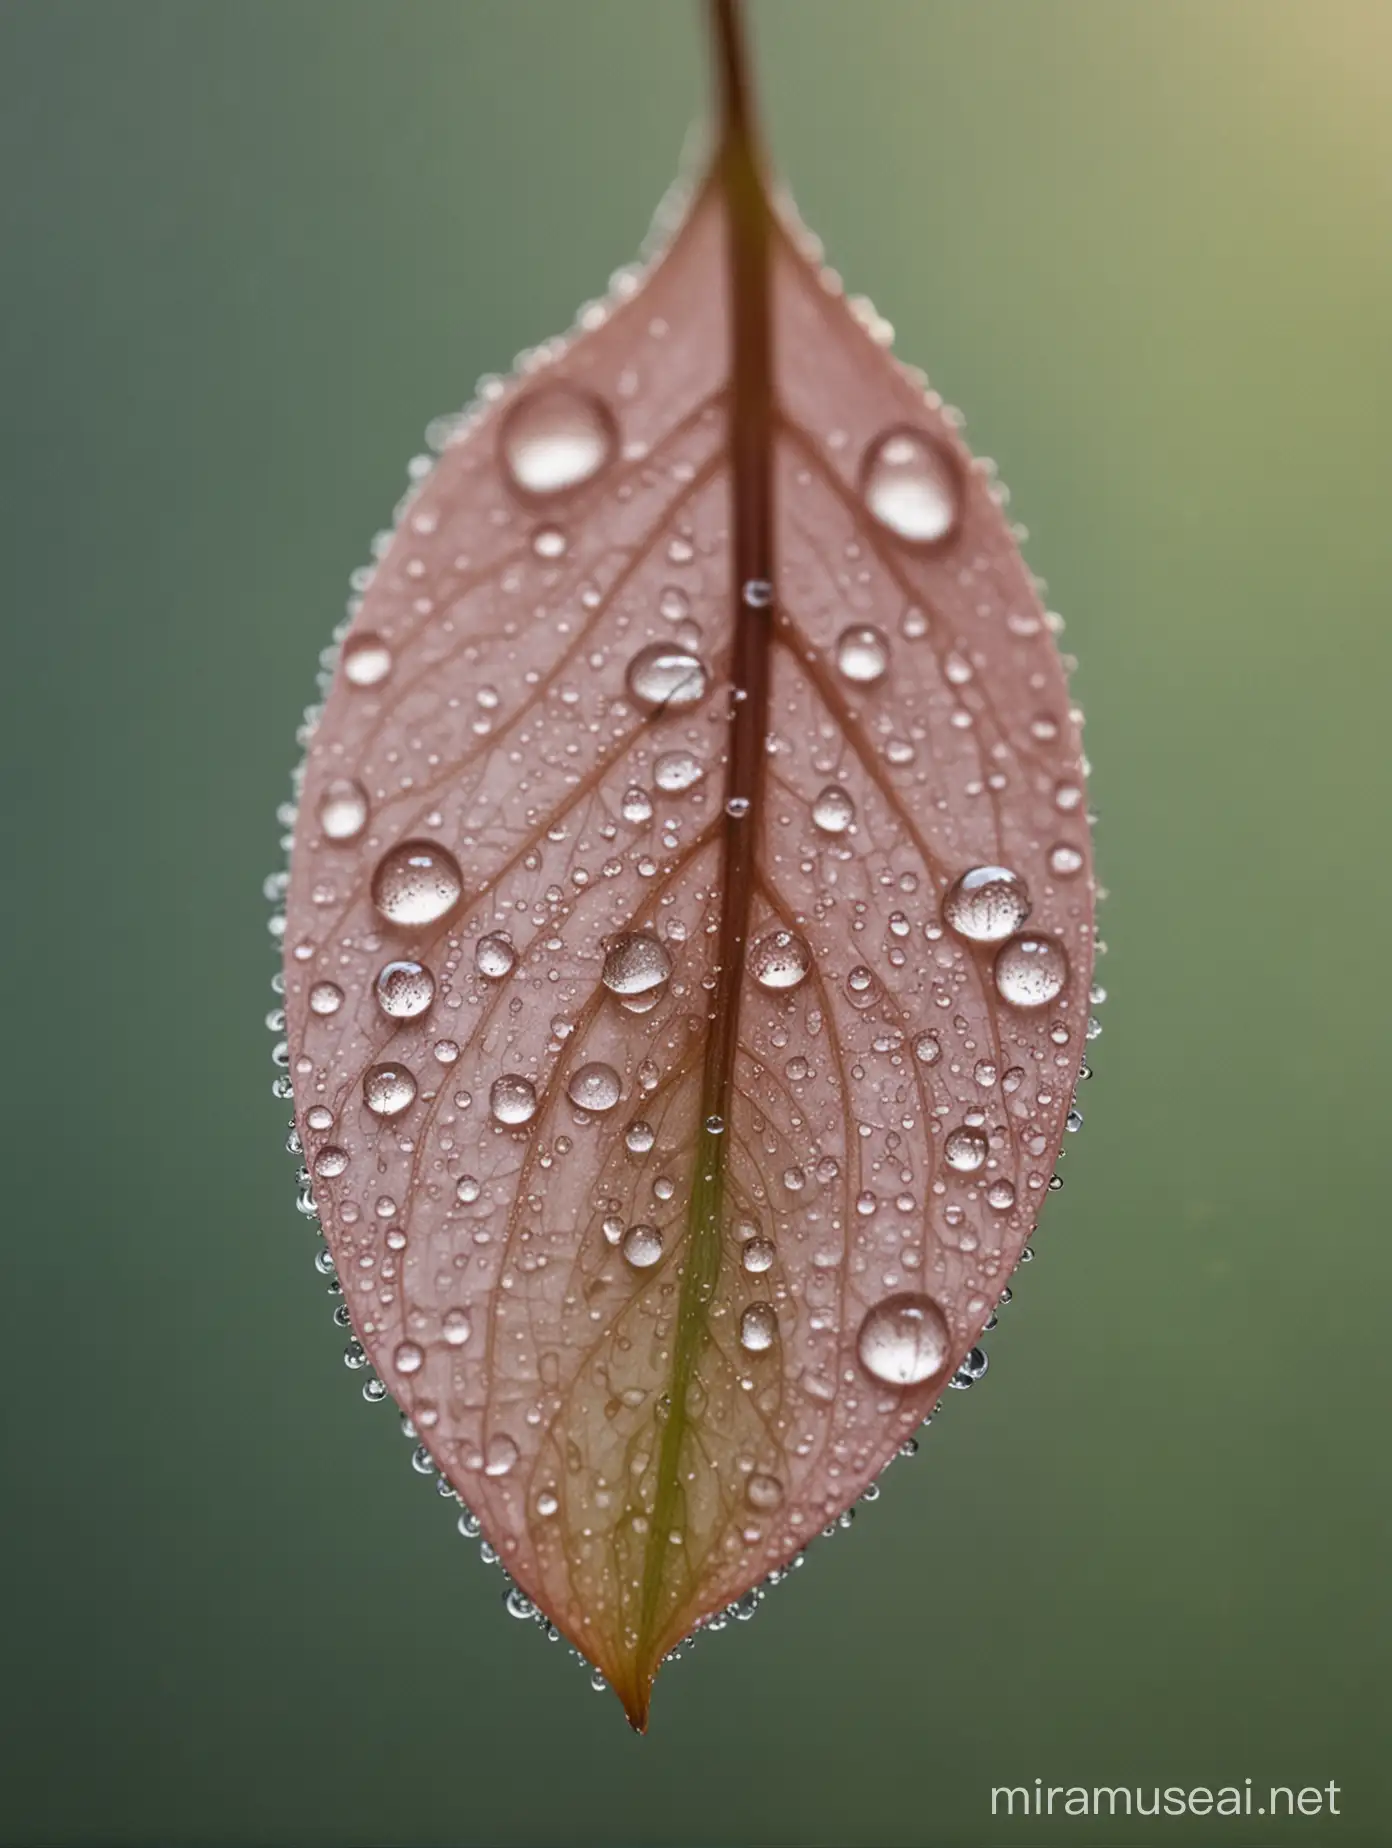 Photographic, cinematic, A macro photograph of a flower petal covered in morning dew, with each droplet reflecting the surrounding environment, capturing the purity and freshness of spring.